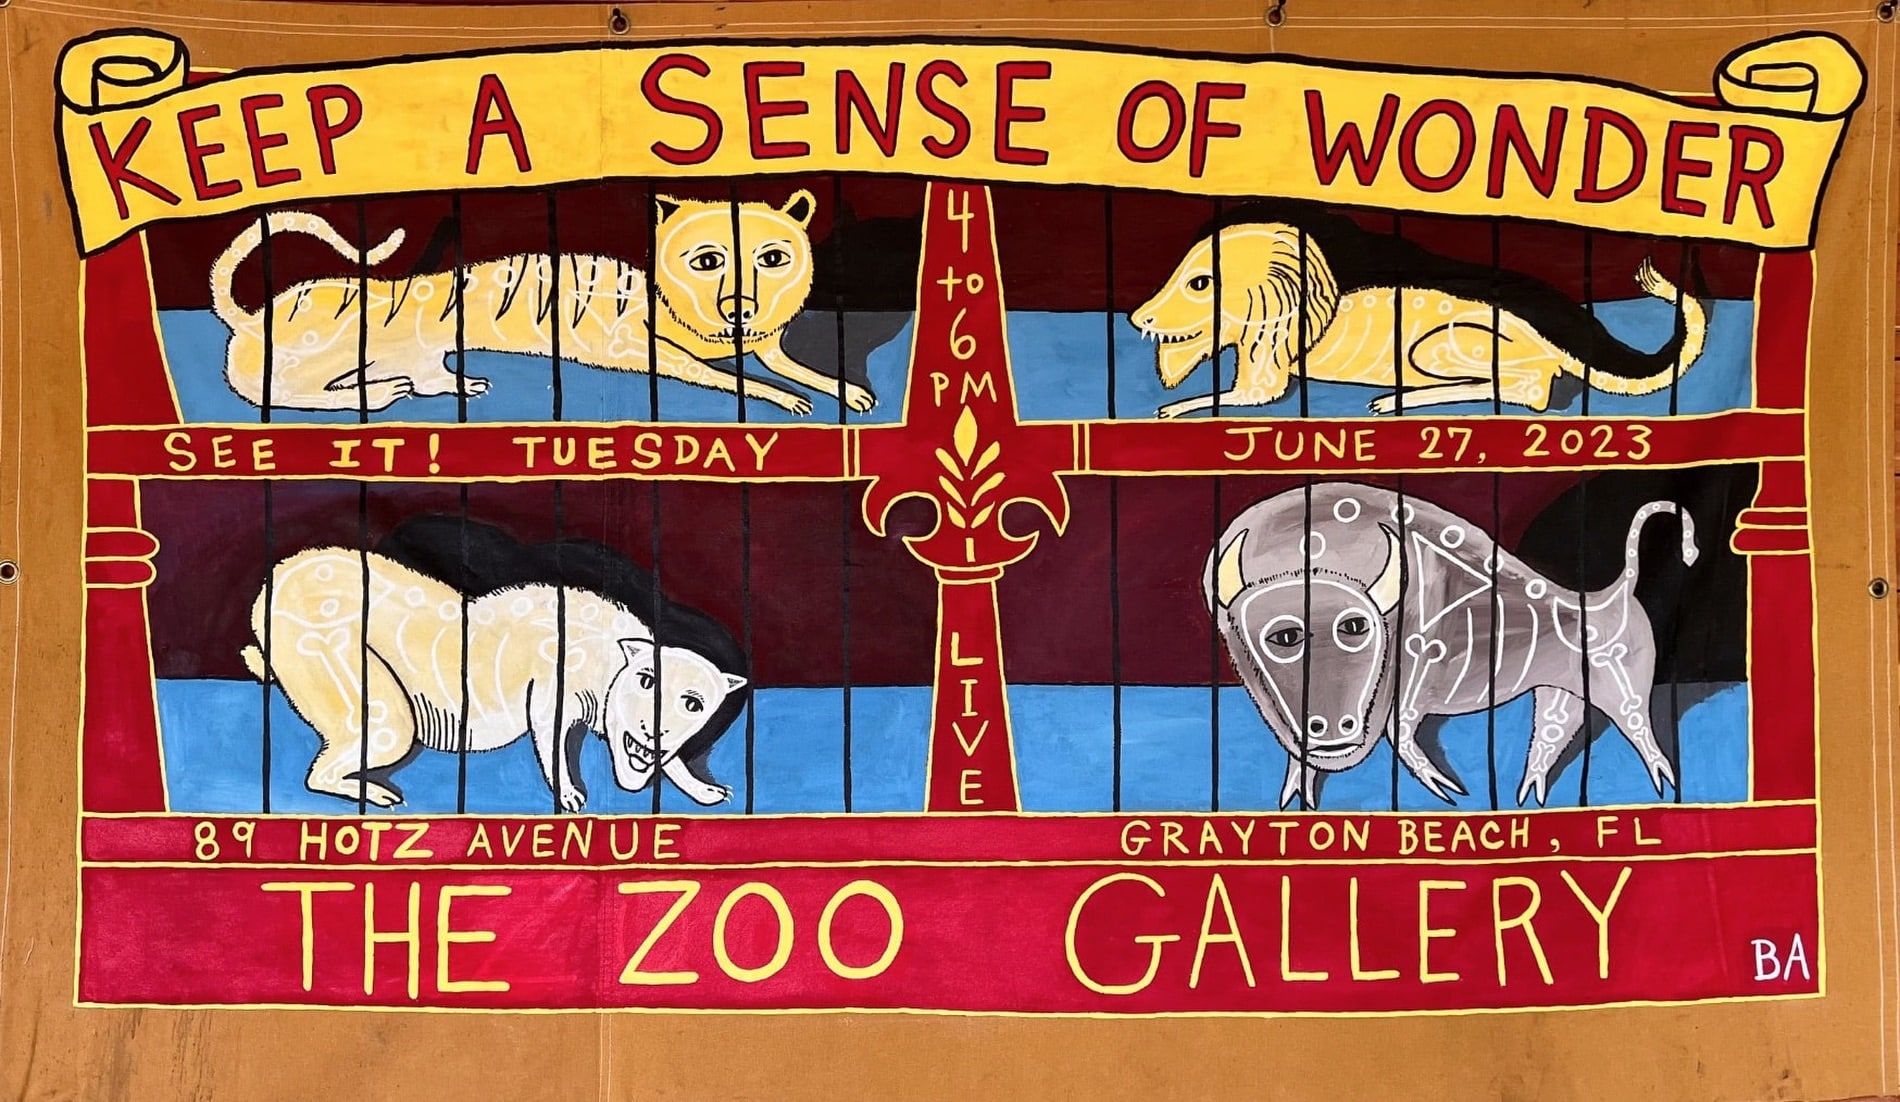 THE ZOO GALLERY TO HOST SPECIAL EVENT WITH ACCLAIMED ARTIST BUTCH ANTHONY June 27th